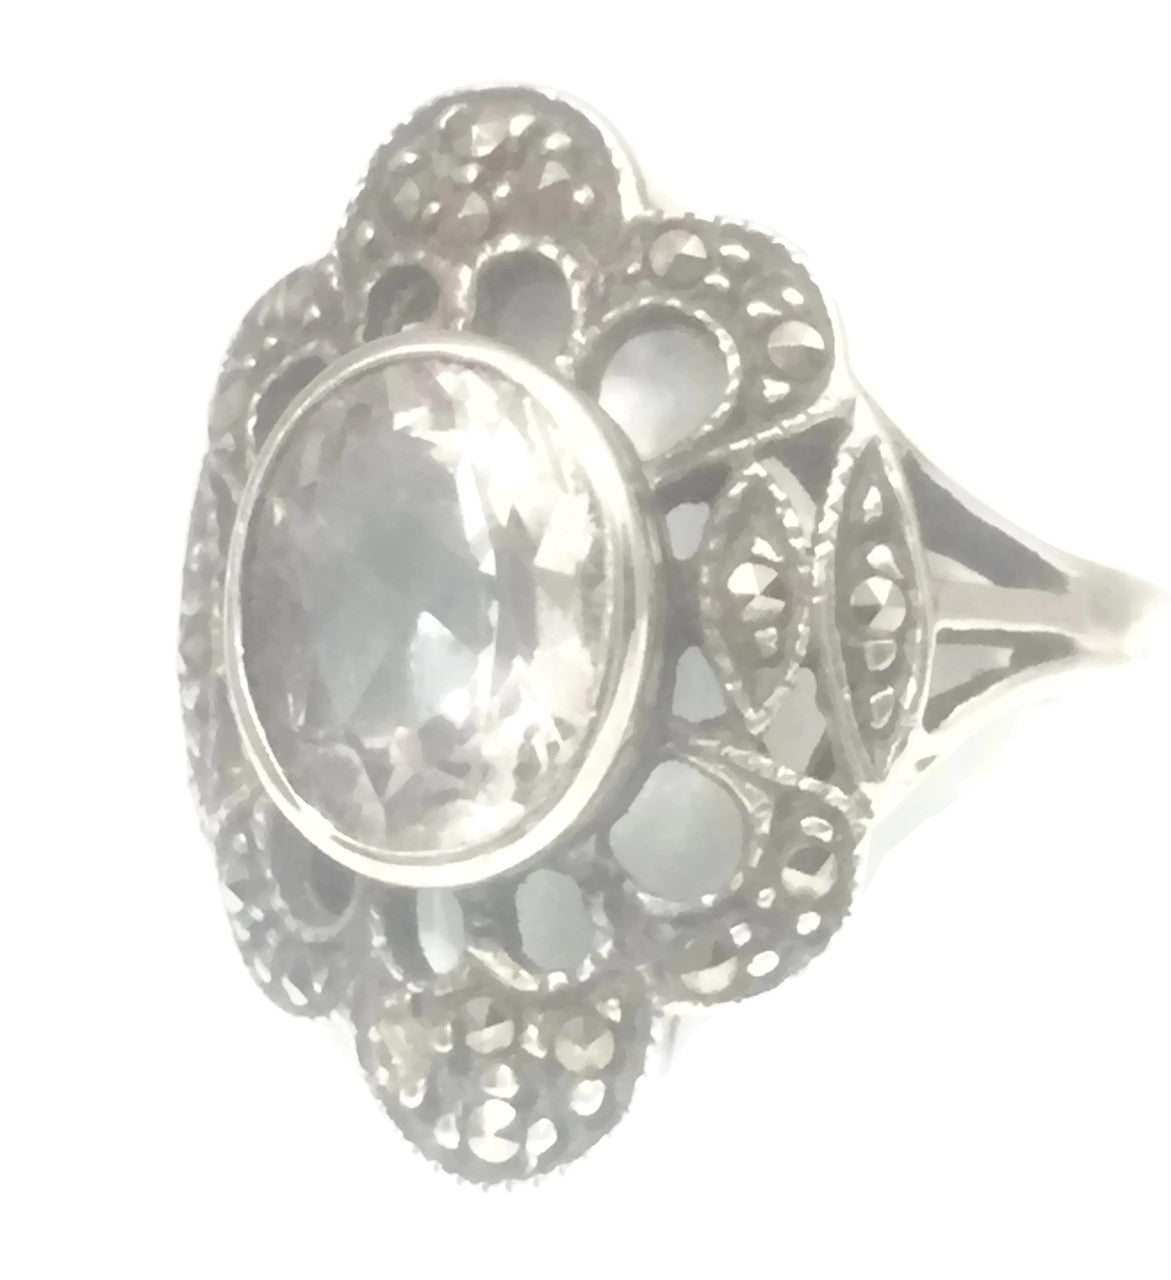 Marcasite Ring Art Deco Sterling Silver Size 6.75